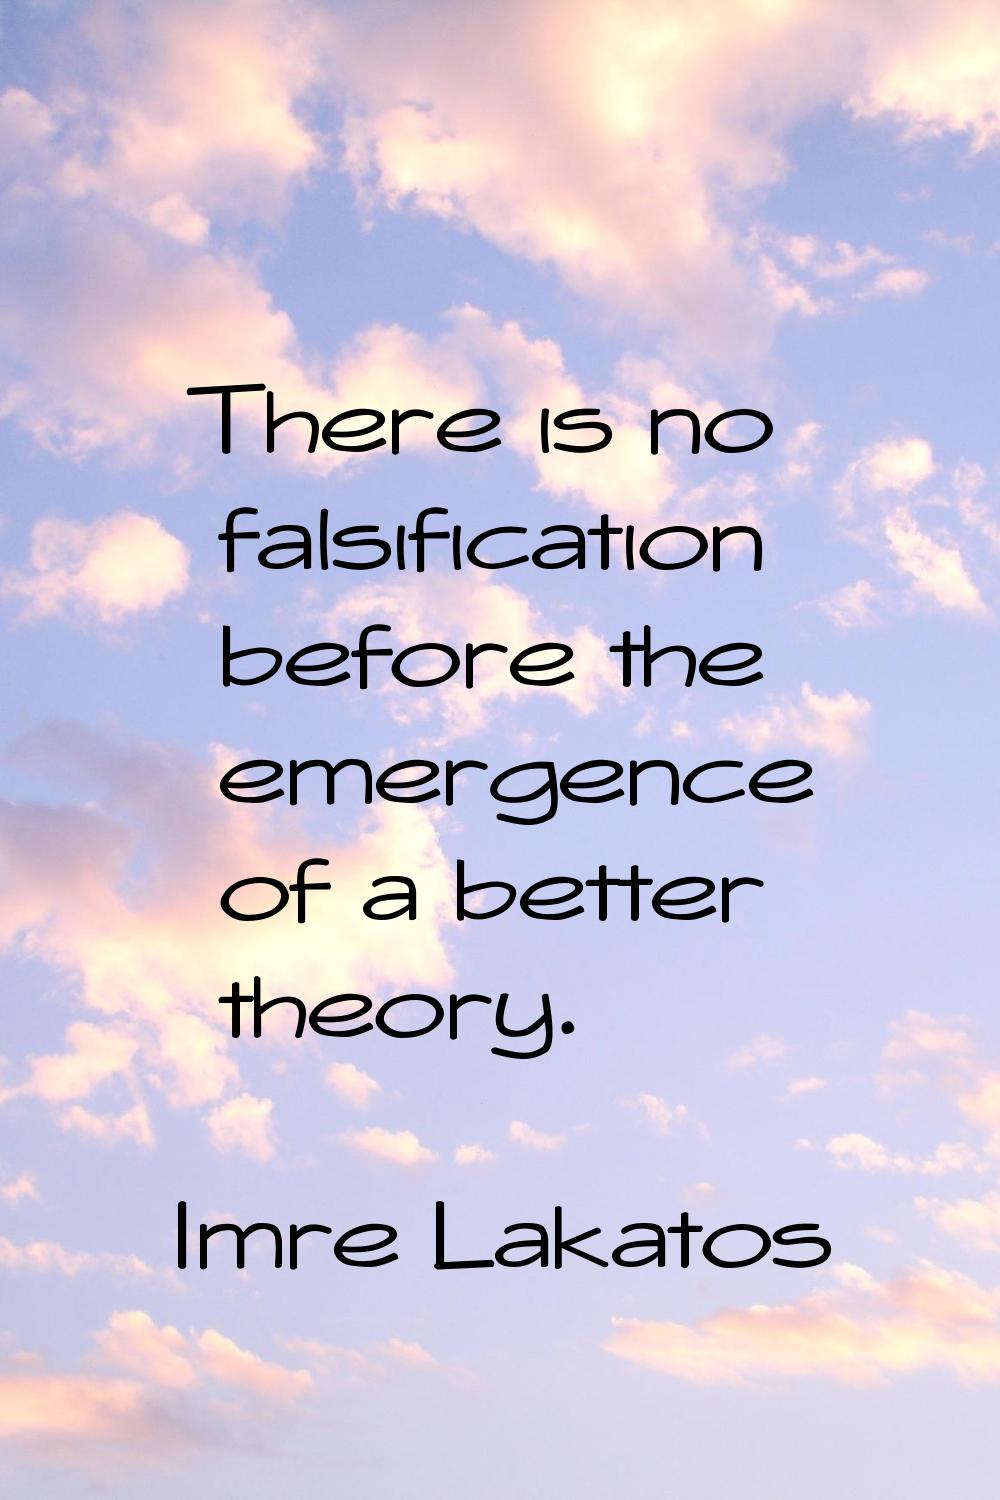 There is no falsification before the emergence of a better theory.